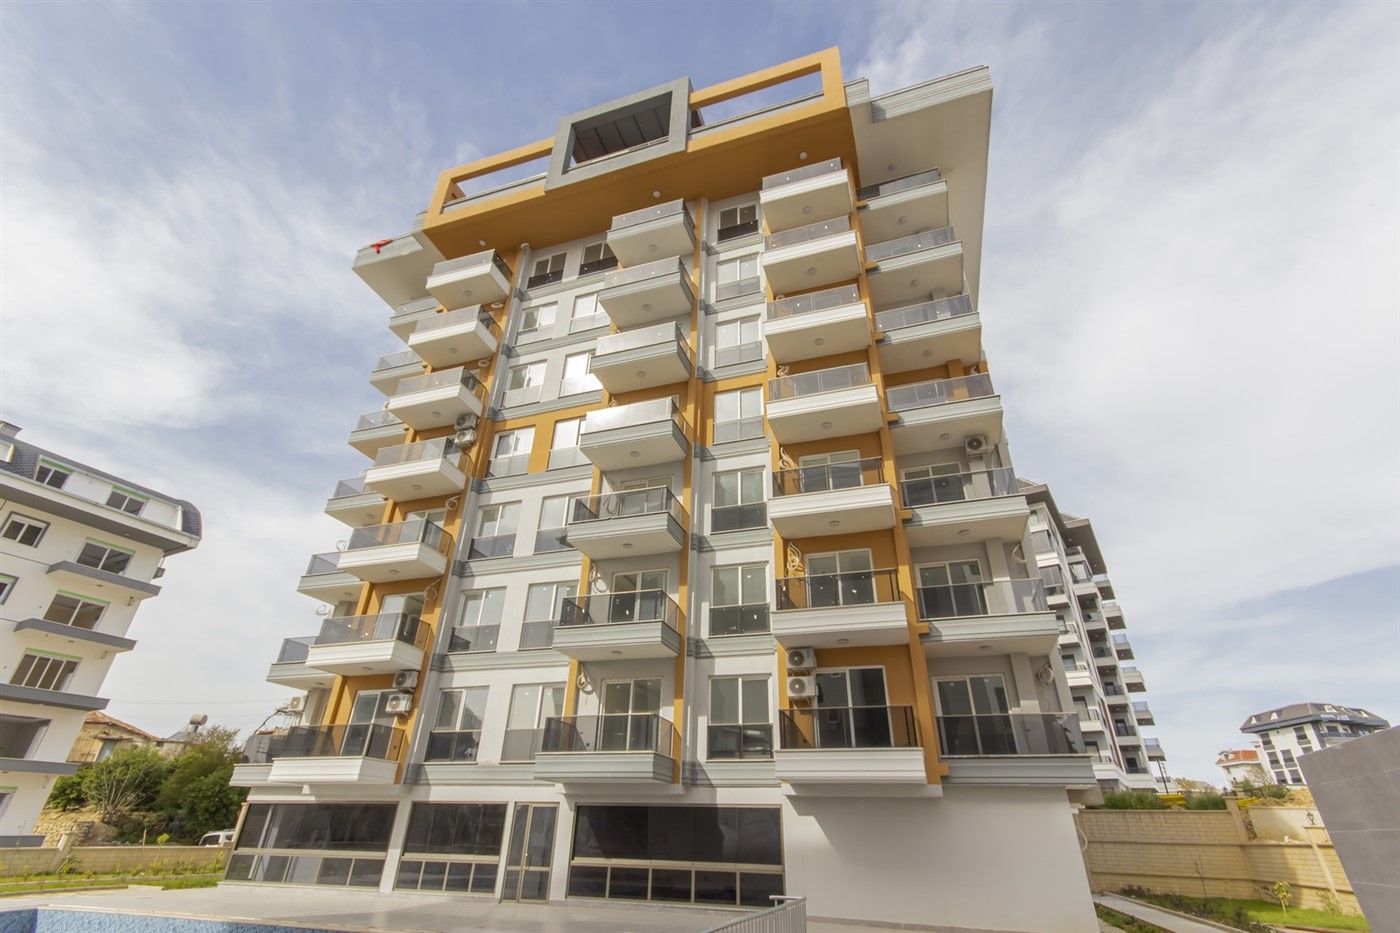 New 1+1 apartment in a picturesque district of Alanya - Avsallar